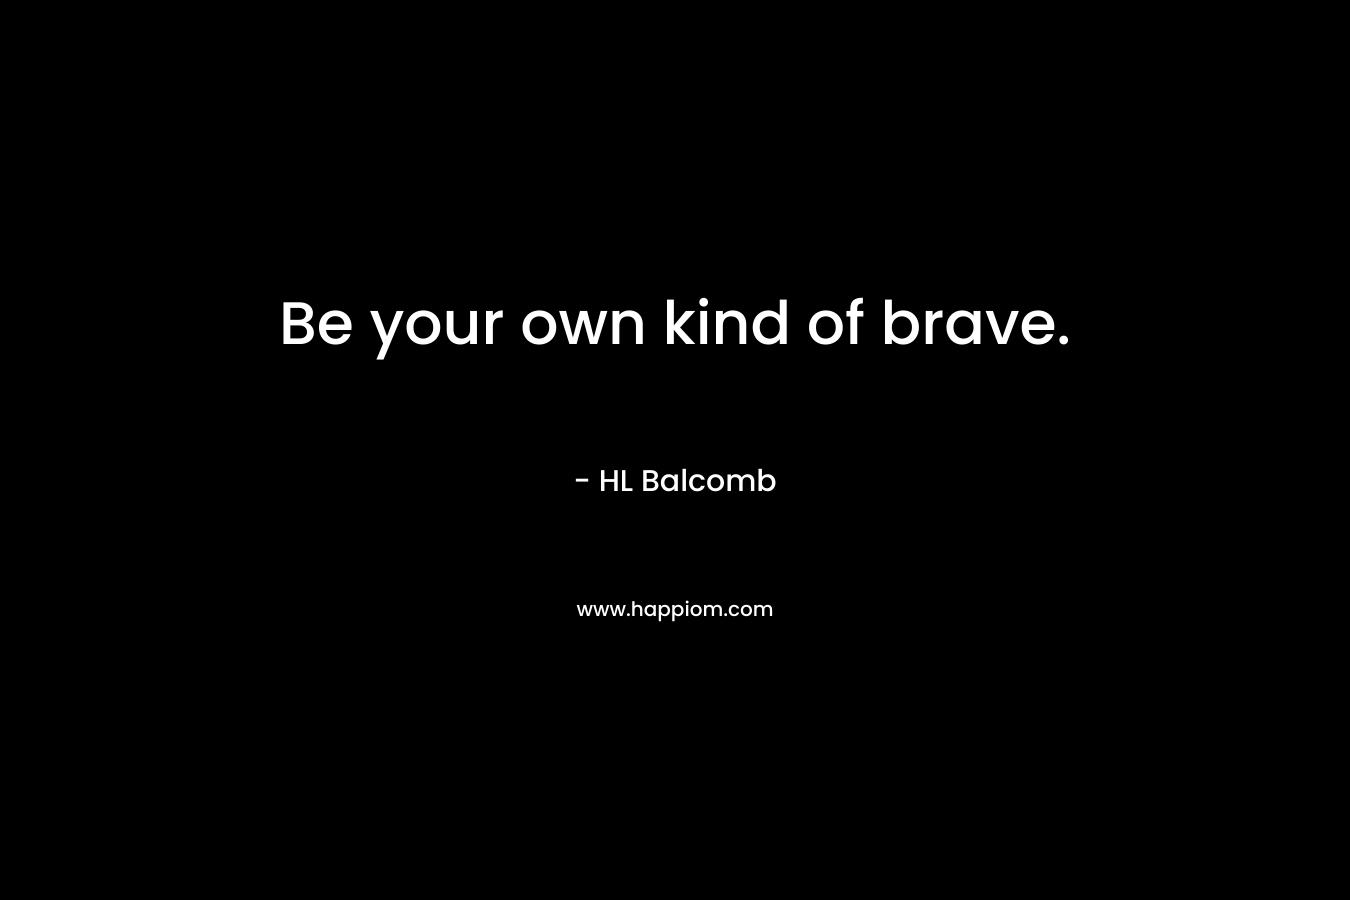 Be your own kind of brave. – HL Balcomb